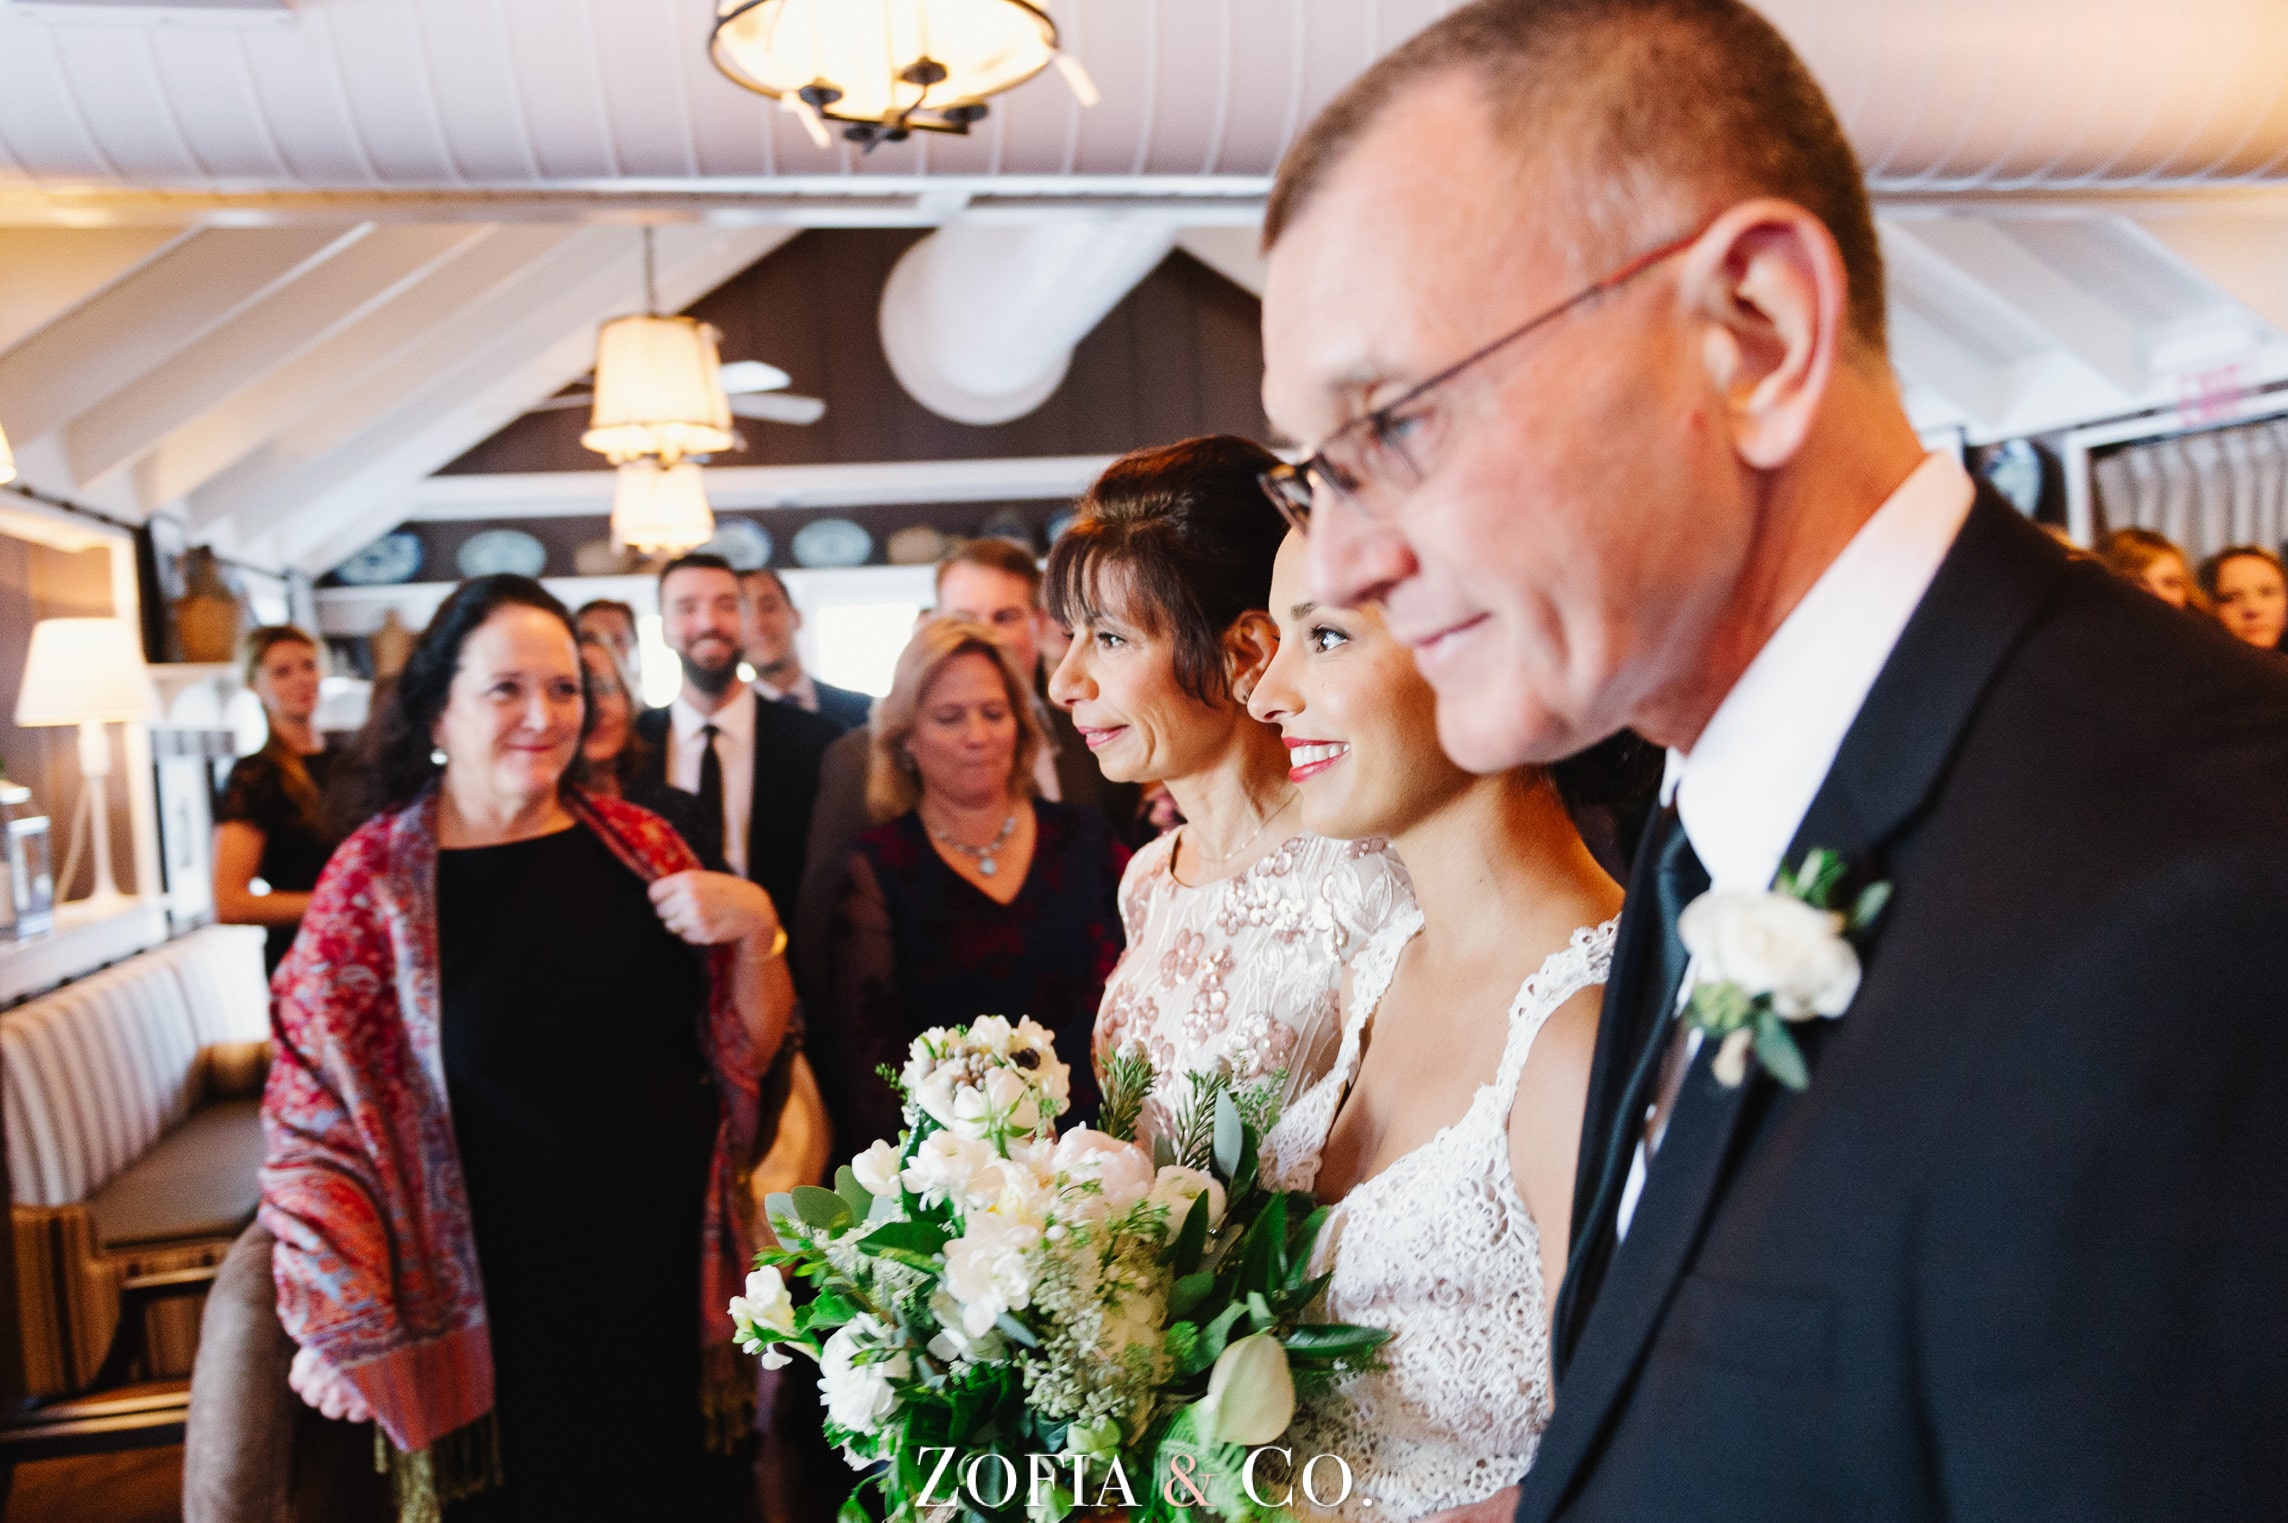 Nantucket Wedding at Great Harbor Yacht Club by Zofia and Co.